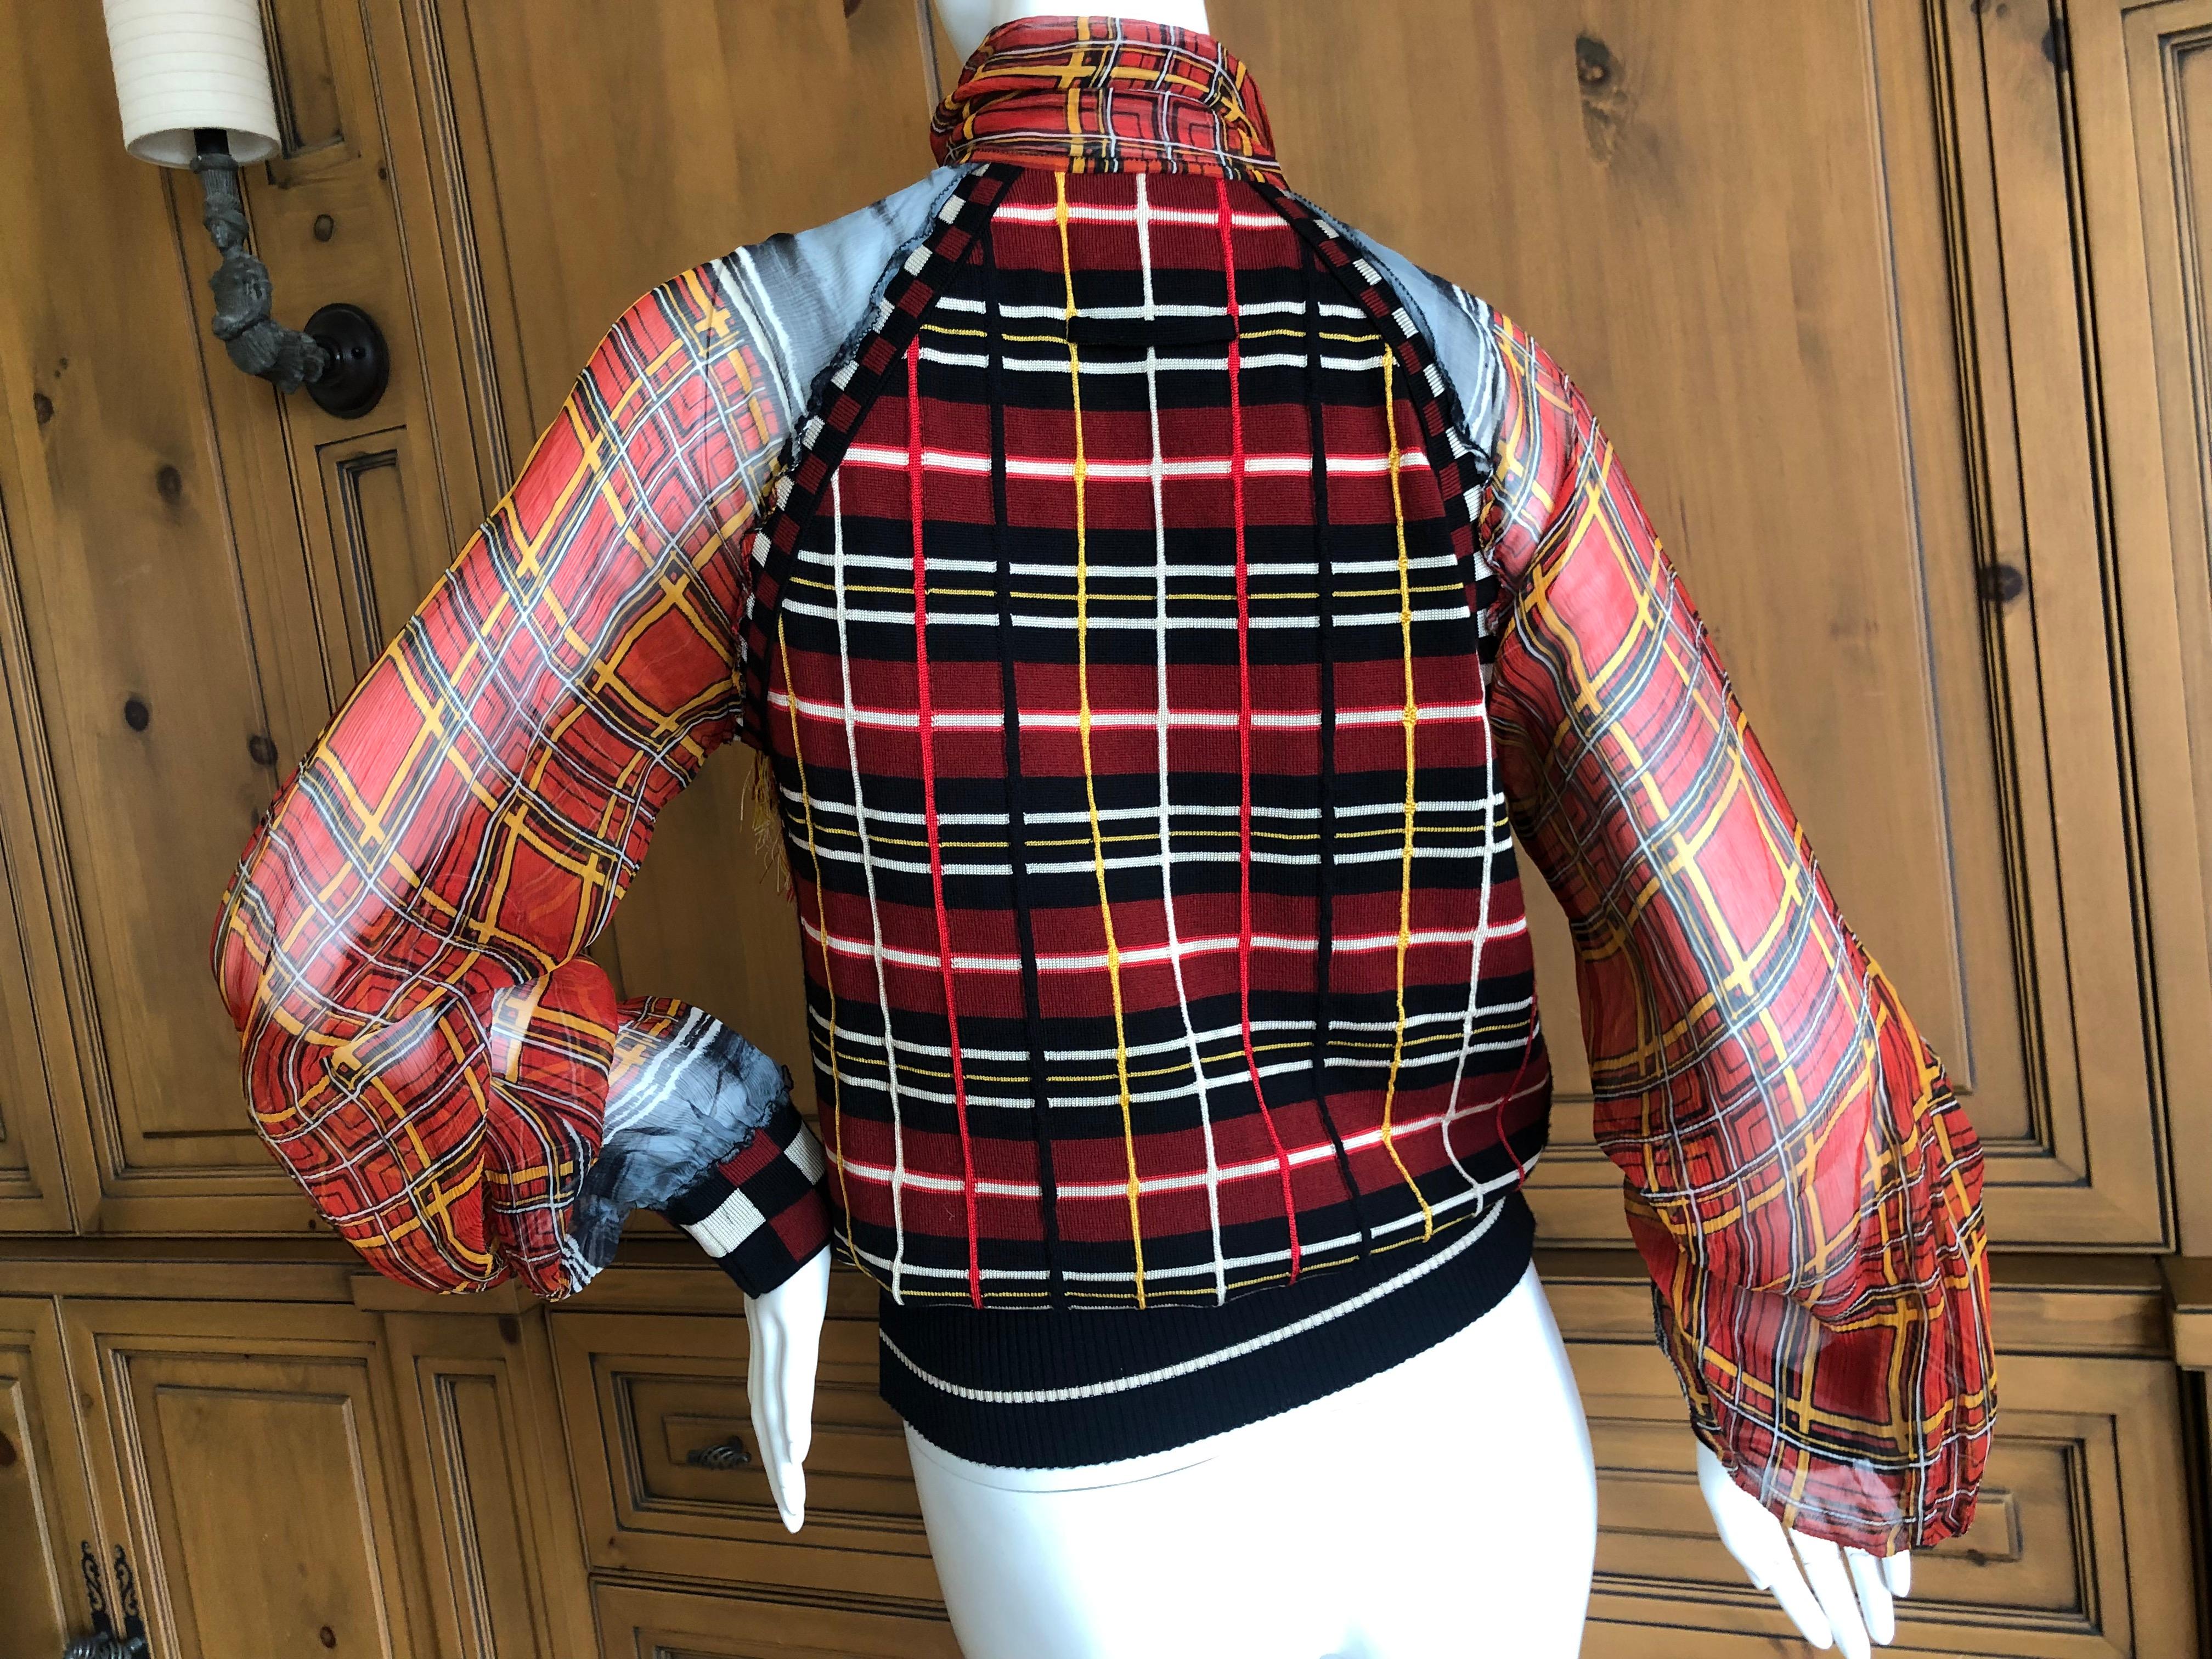 Jean Paul Gaultier Maille Femme 1987 Plaid Top w Sheer Poet Sleeves Fringed Bow 2